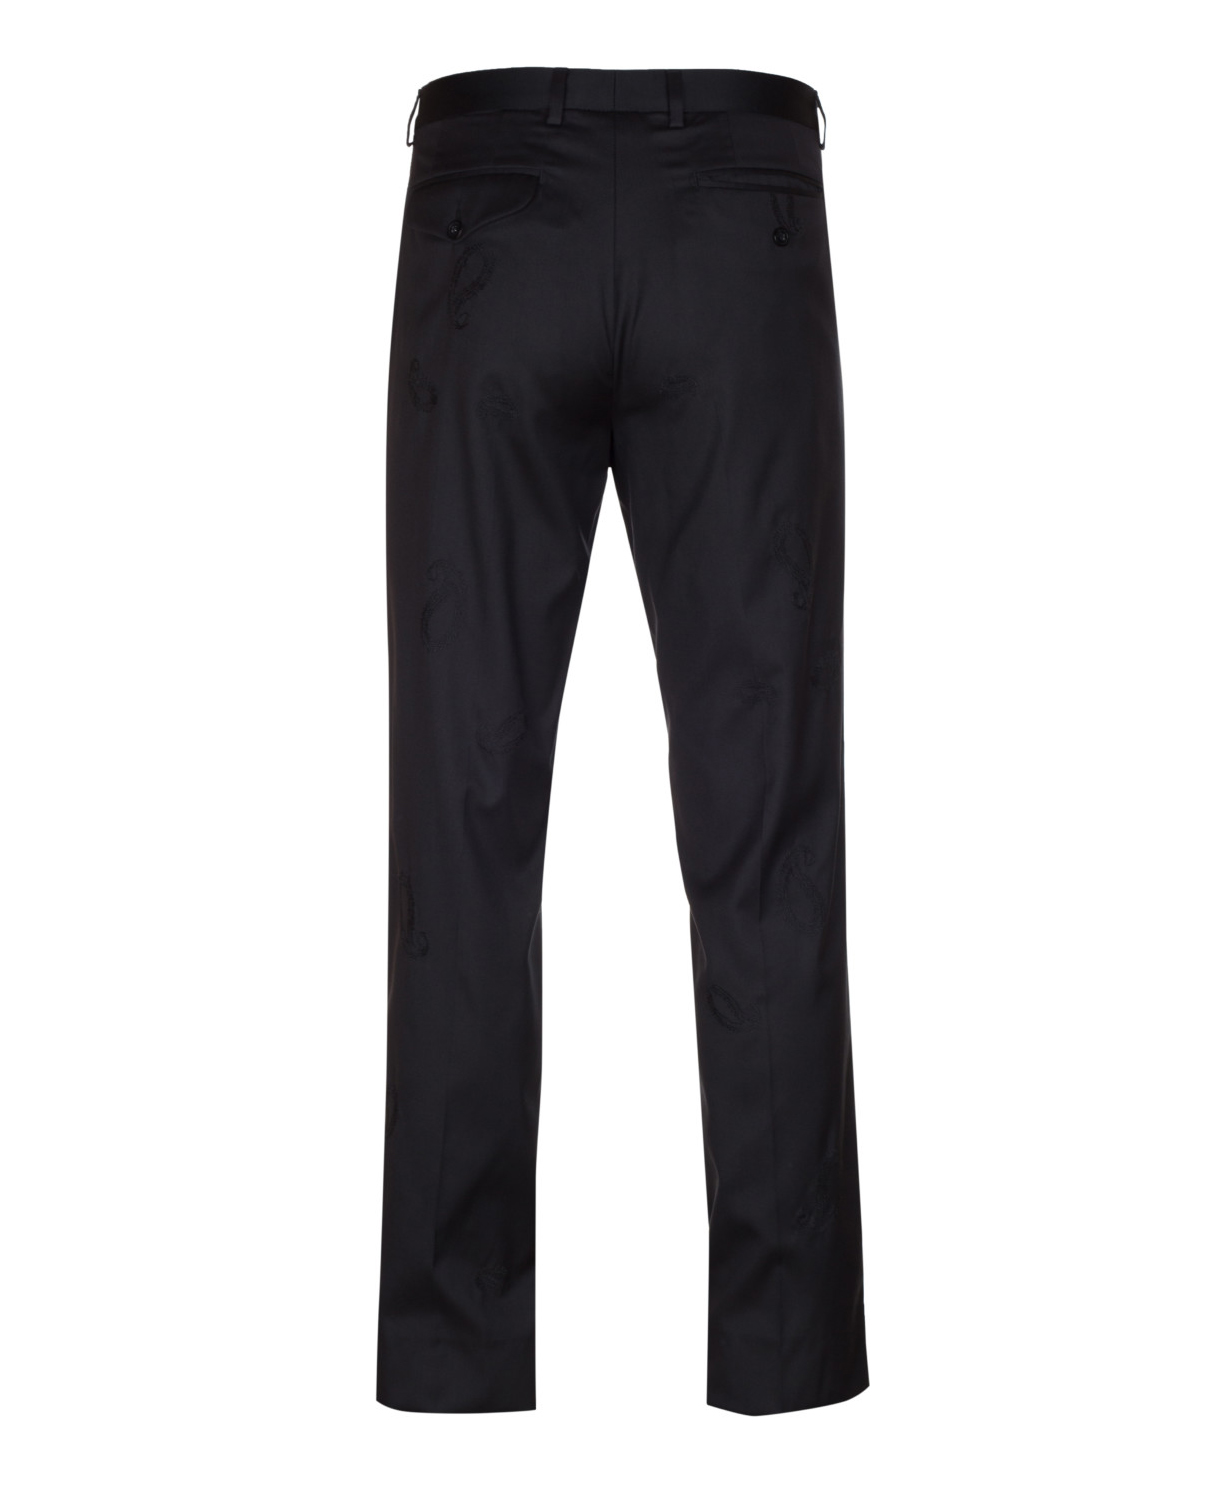 www.couturepoint.com-emporio-armani-mens-black-wool-and-silk-embroidery-dress-pants